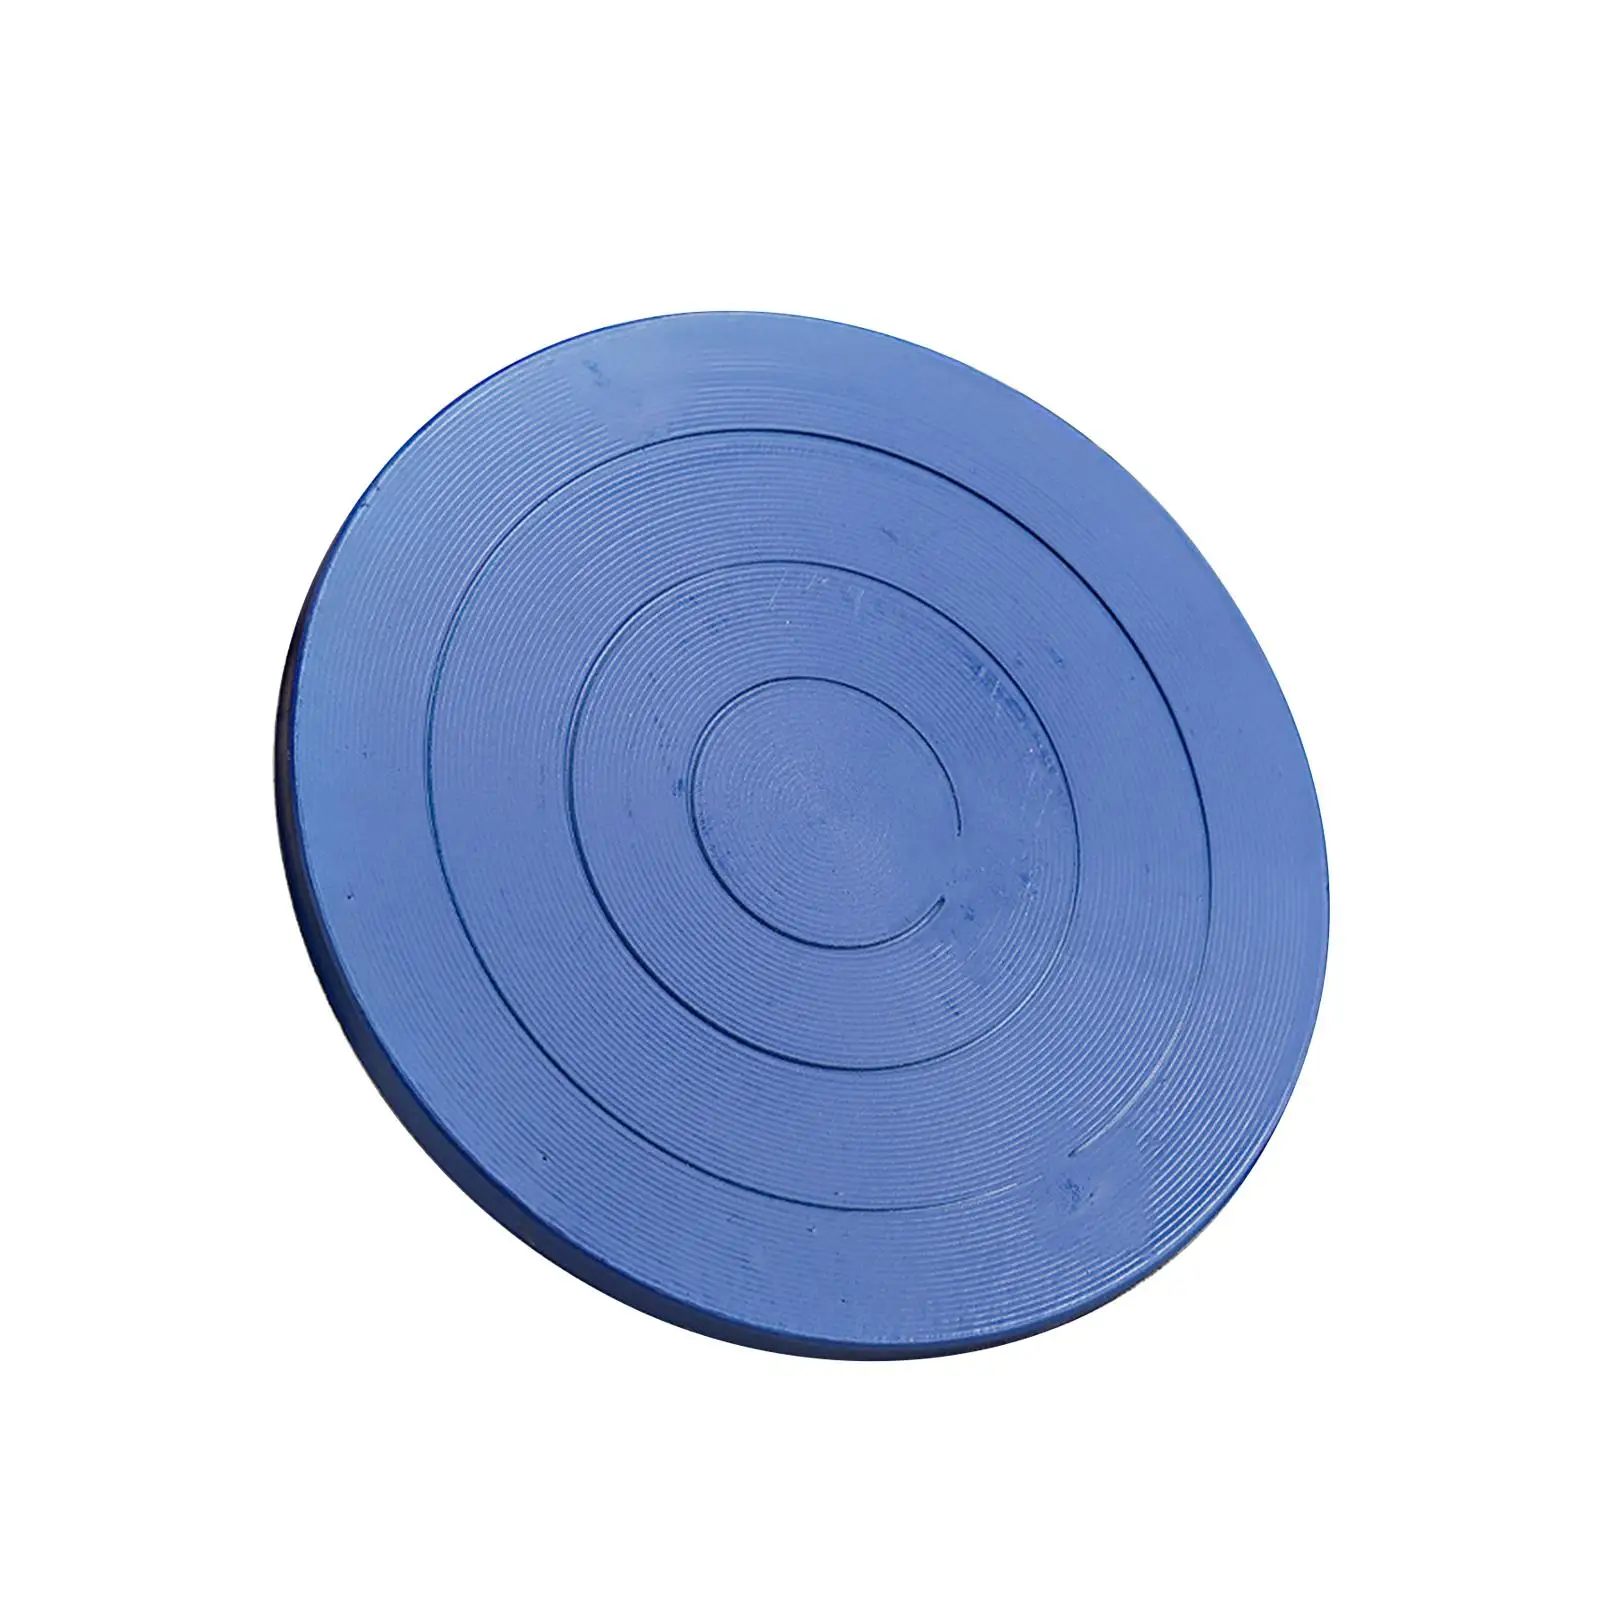 Pottery Turntable Wheel for Sculpting Banding Wheel Rotating Cake Turntable